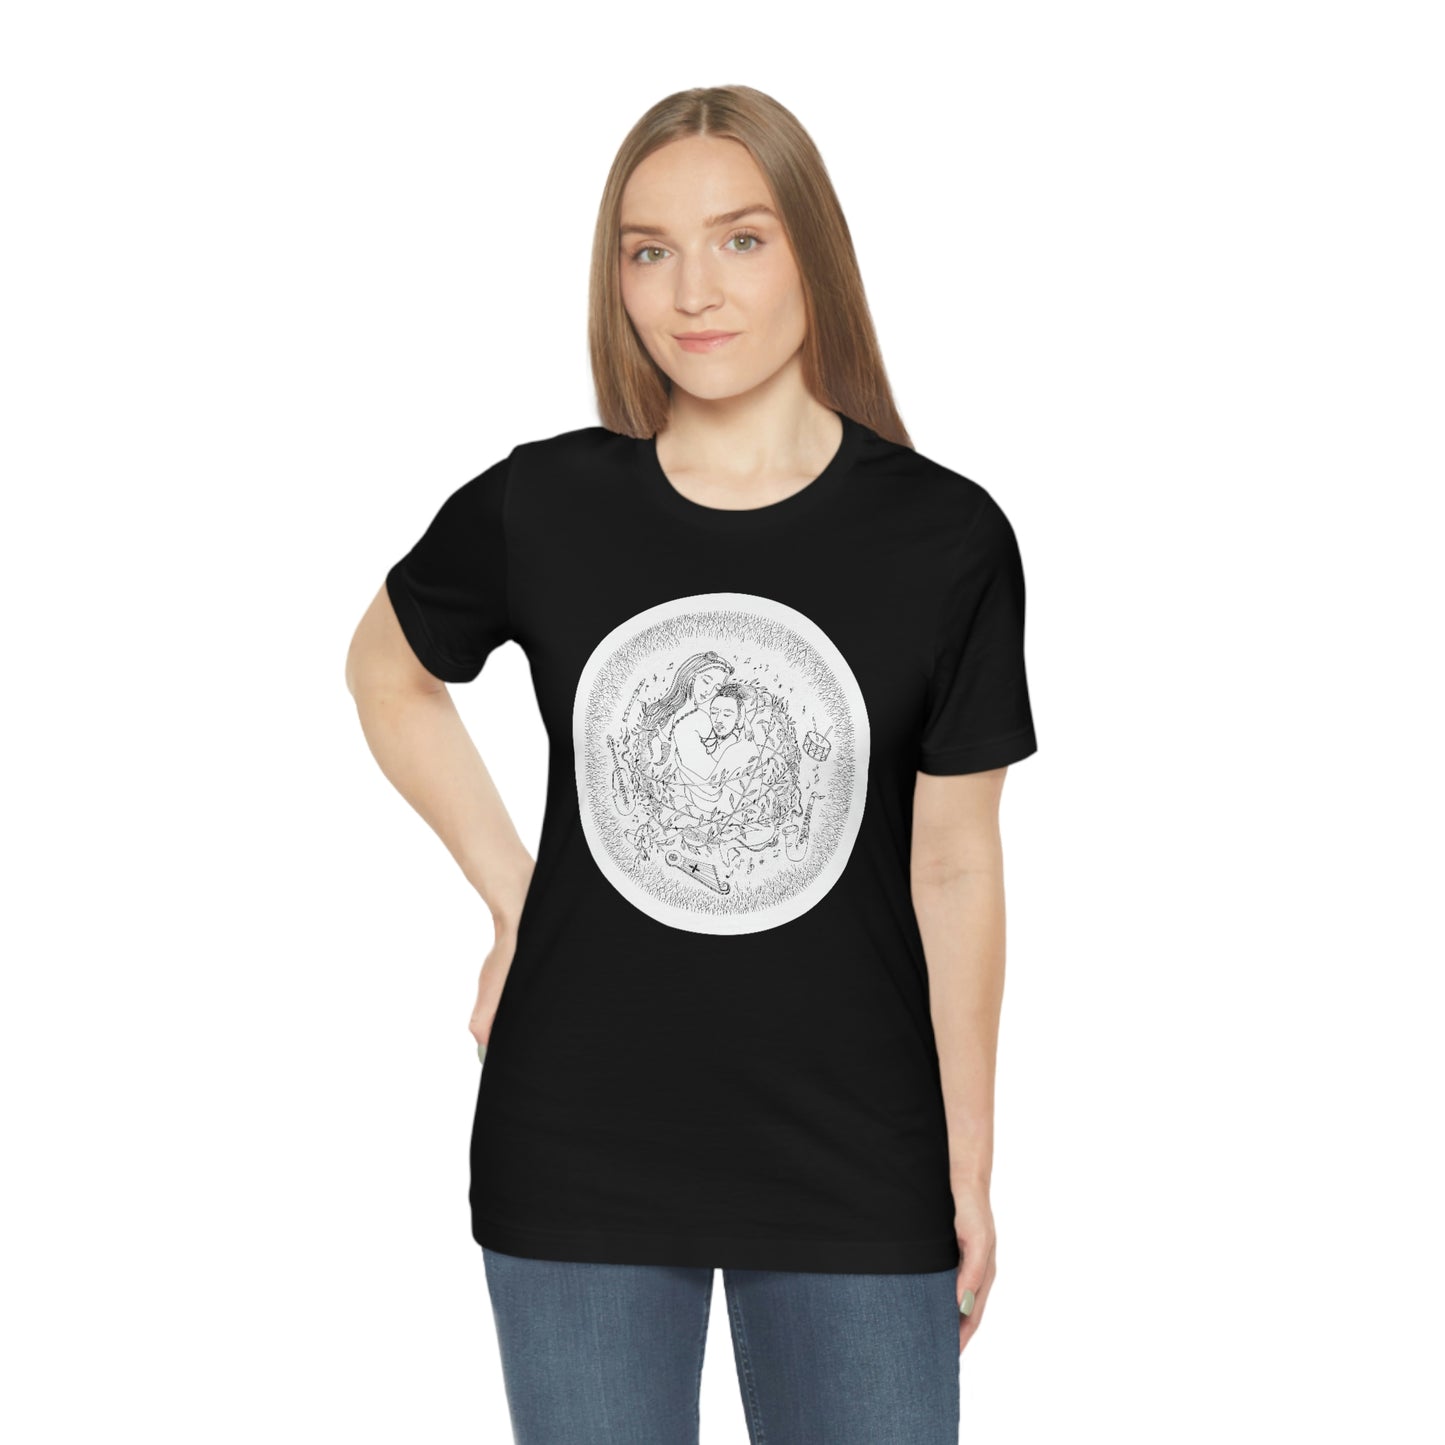 Chinese Zodiac Sign T Shirt (Ox) Unisex Regular Fit Limited Edition